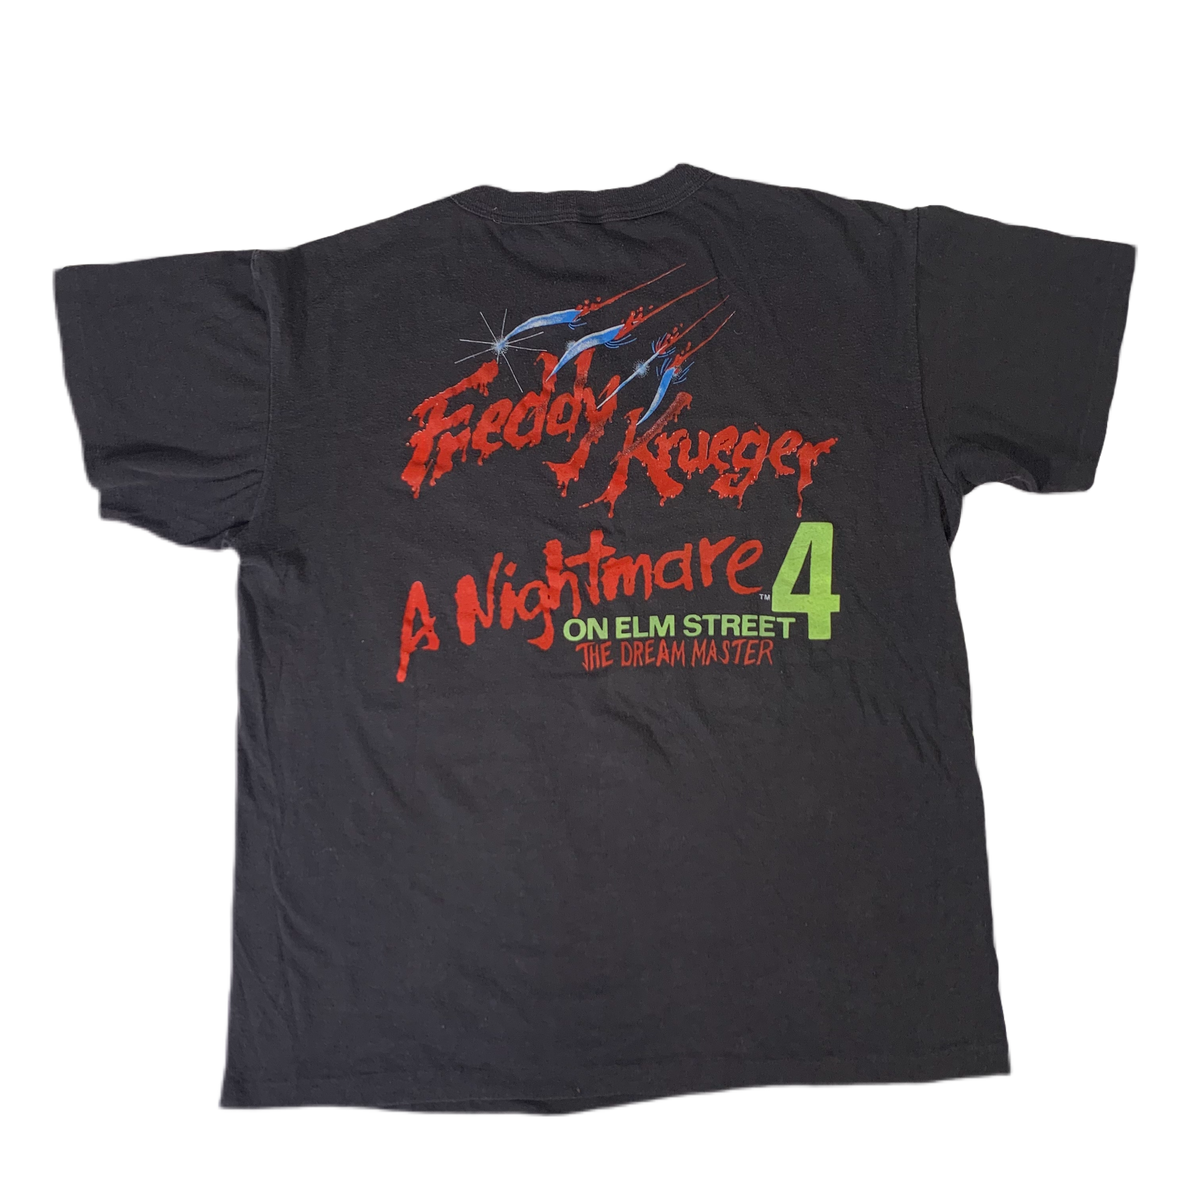 Vintage A Nightmare On Elm Street 4 &quot;The Dream Master&quot; T-Shirt